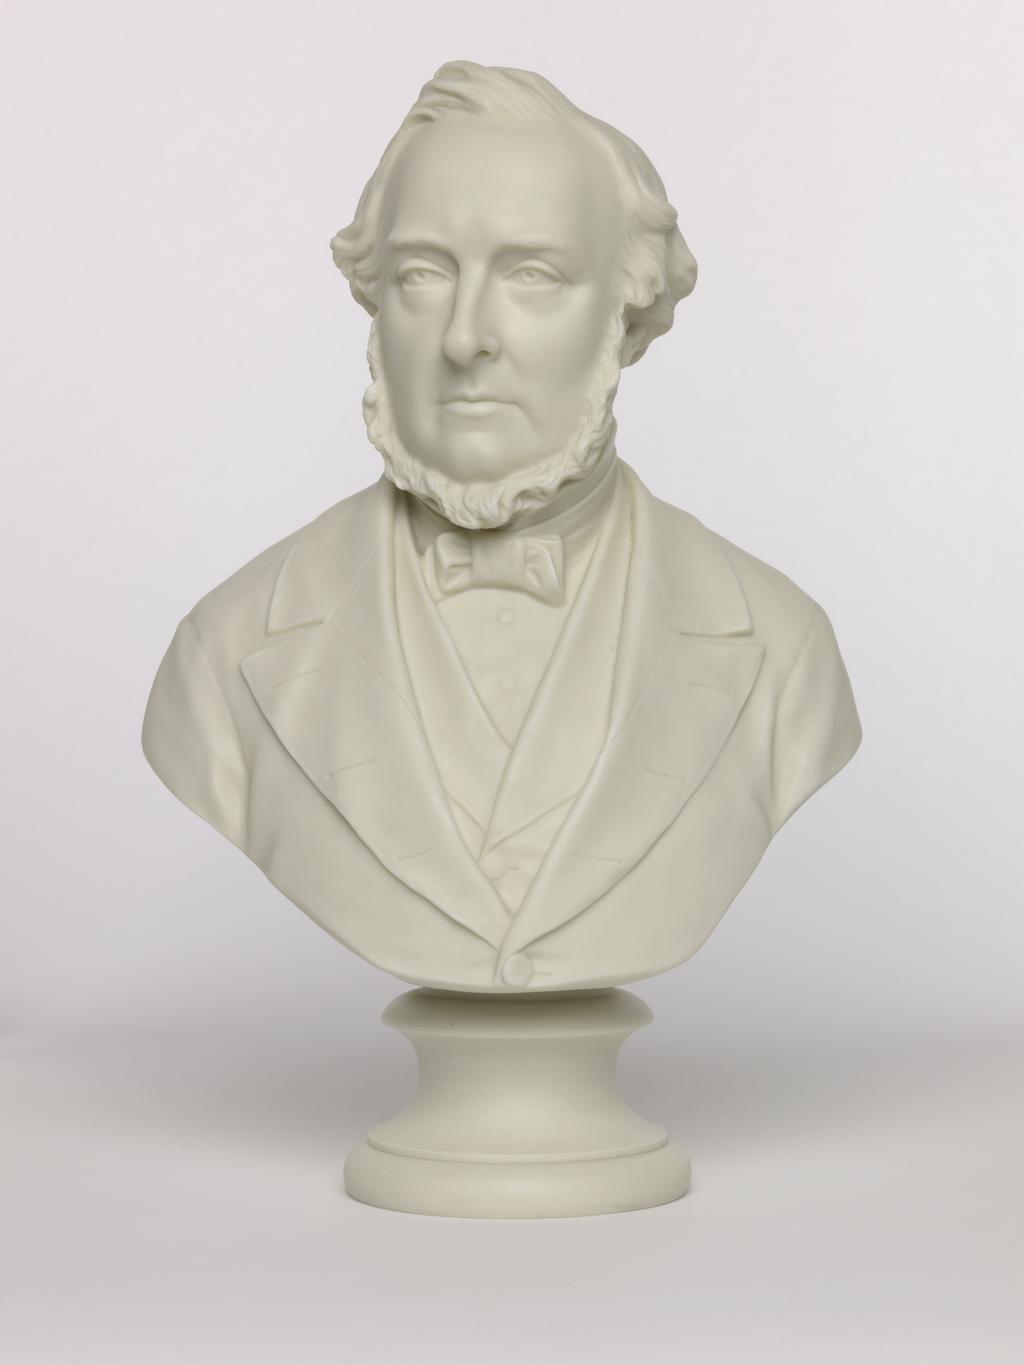 An image of Bust. Unknown man. Copeland, England, Staffordshire, Stoke-on-Trent. Inscription: maker's name; reverse of bust; marked; COPYRIGHT RESERVED COPELAND L 76. Parian (porcelain), slip-cast, height, 32.2 cm, length, 20.5 cm, width, 12 cm, length, base, 9.8 cm. Acquisition Credit: Accepted by H. M. Government in lieu of Inheritance Tax from the estate of G. D. V. Glynn, and allocated to the Fitzwilliam Museum.